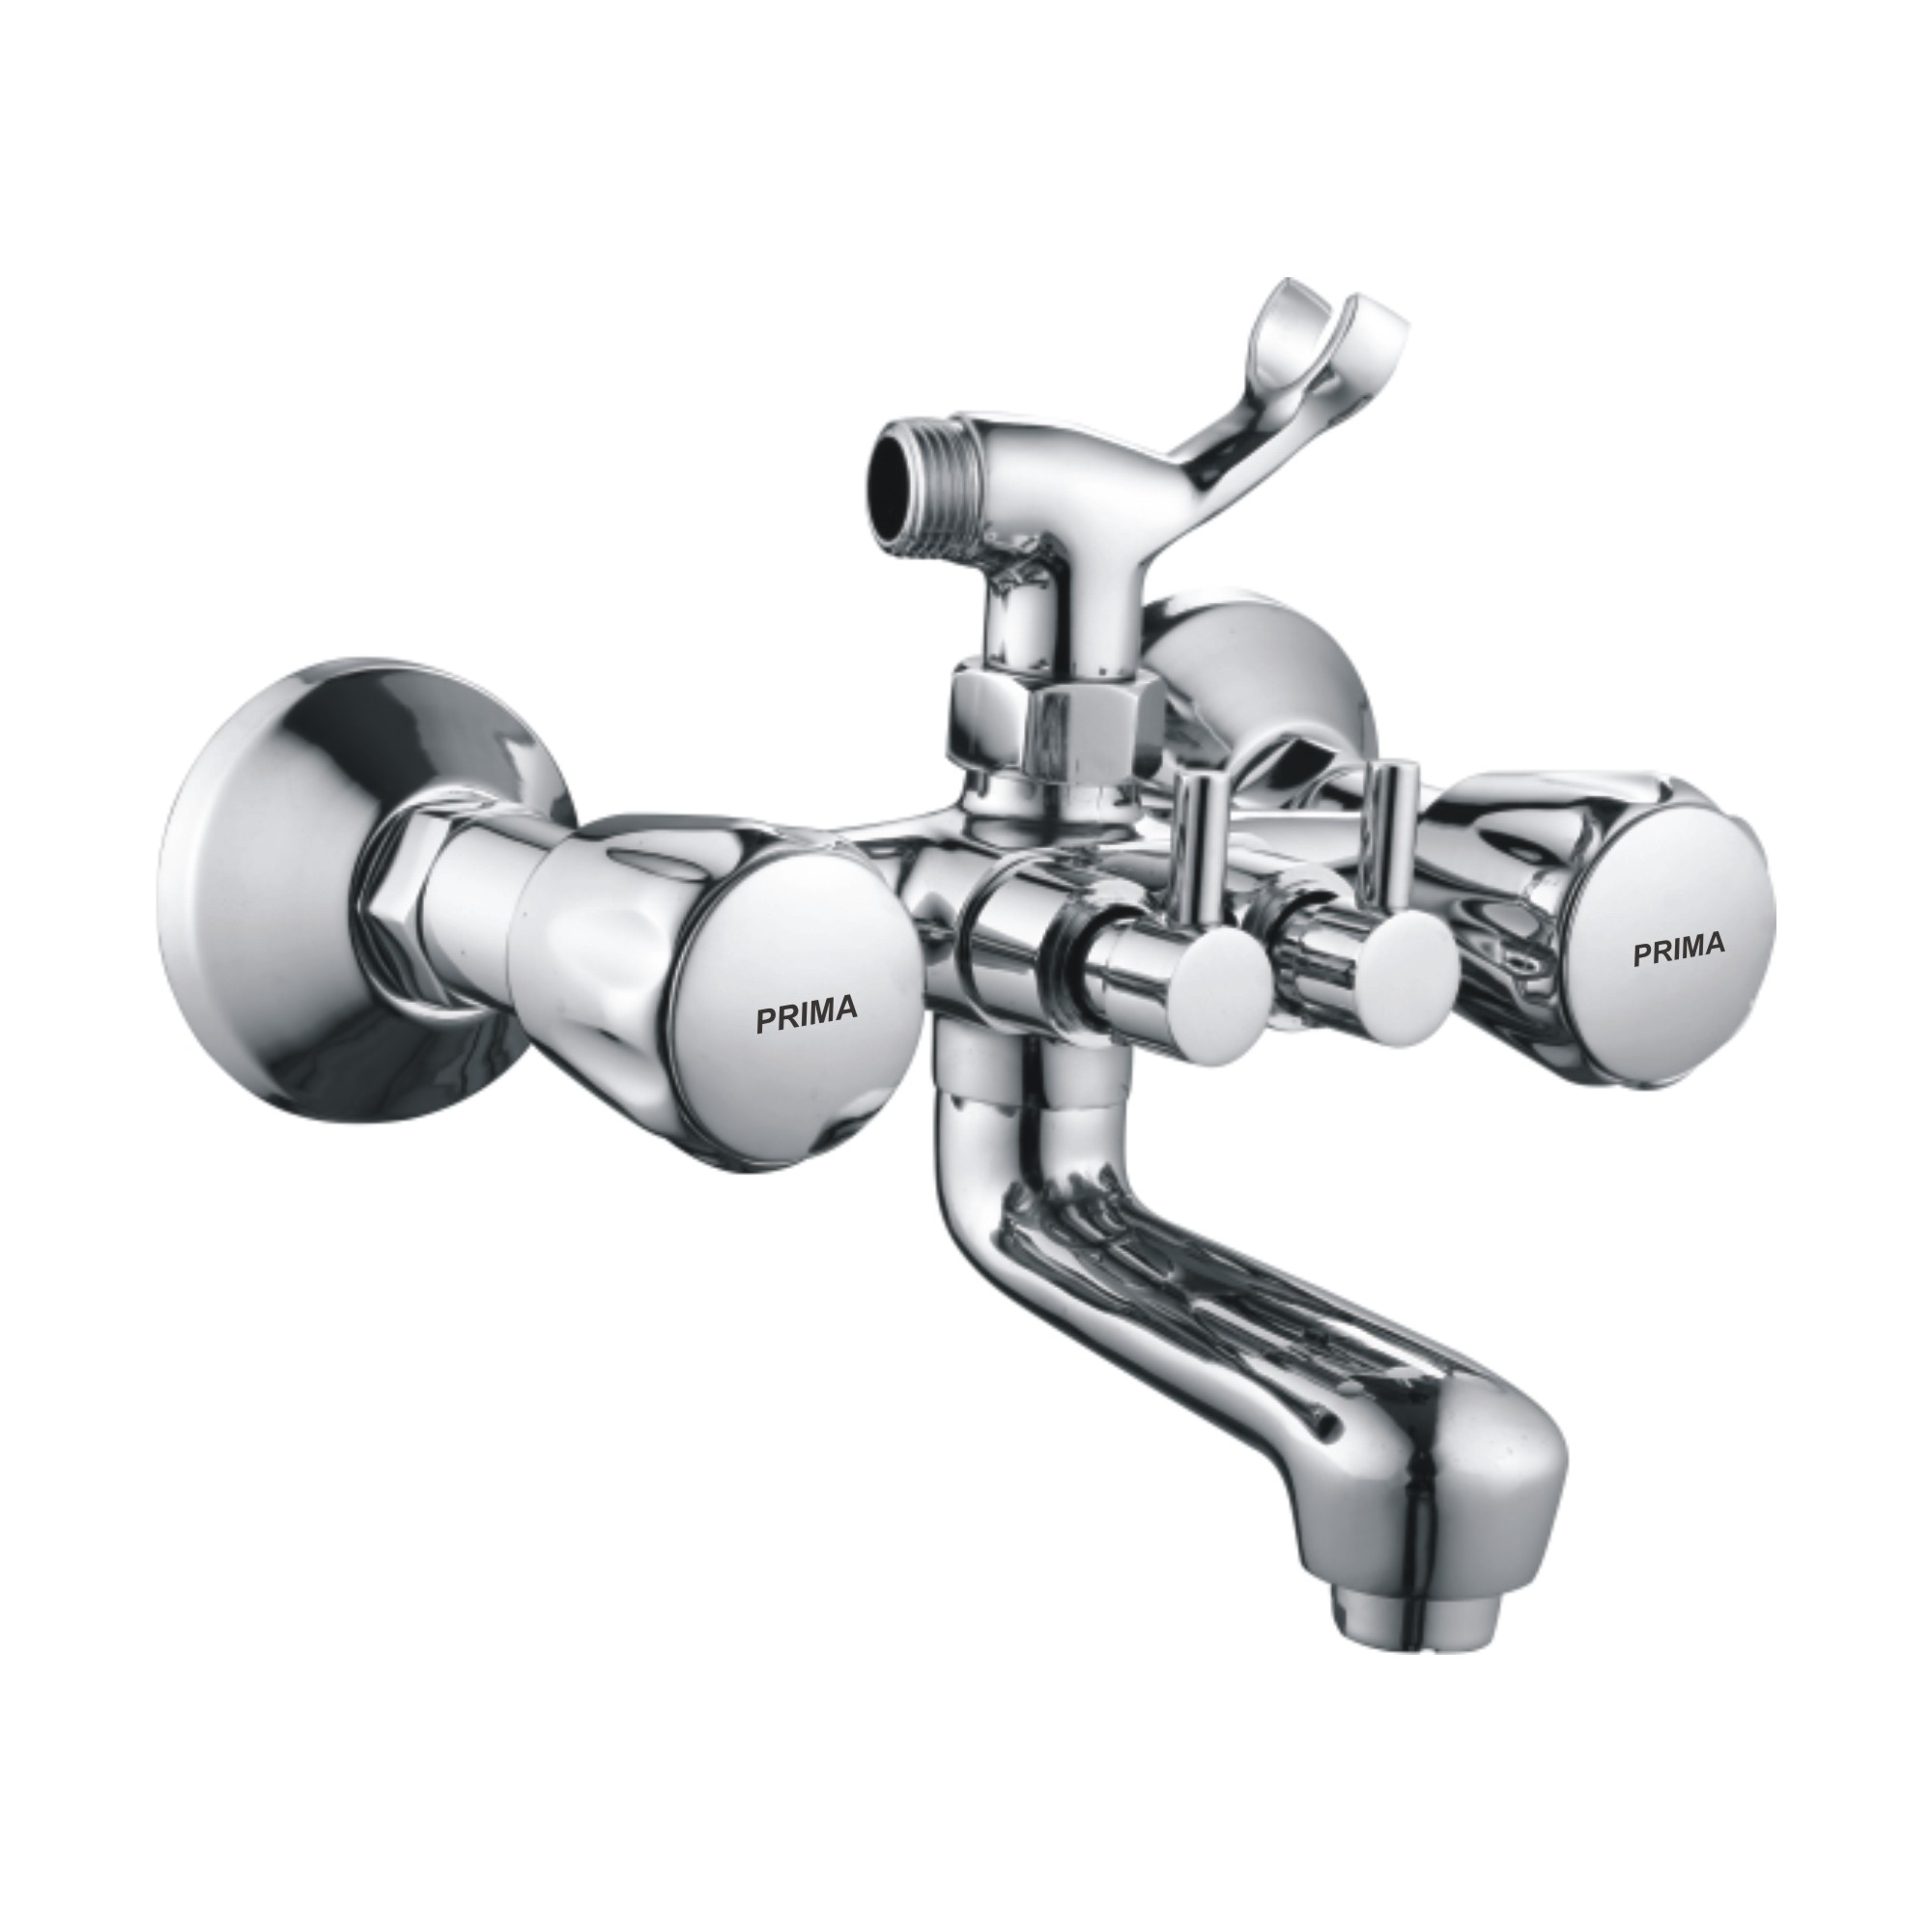 C.P Wall Mixer  with Tele Shower & Flex Tube 1.5m 